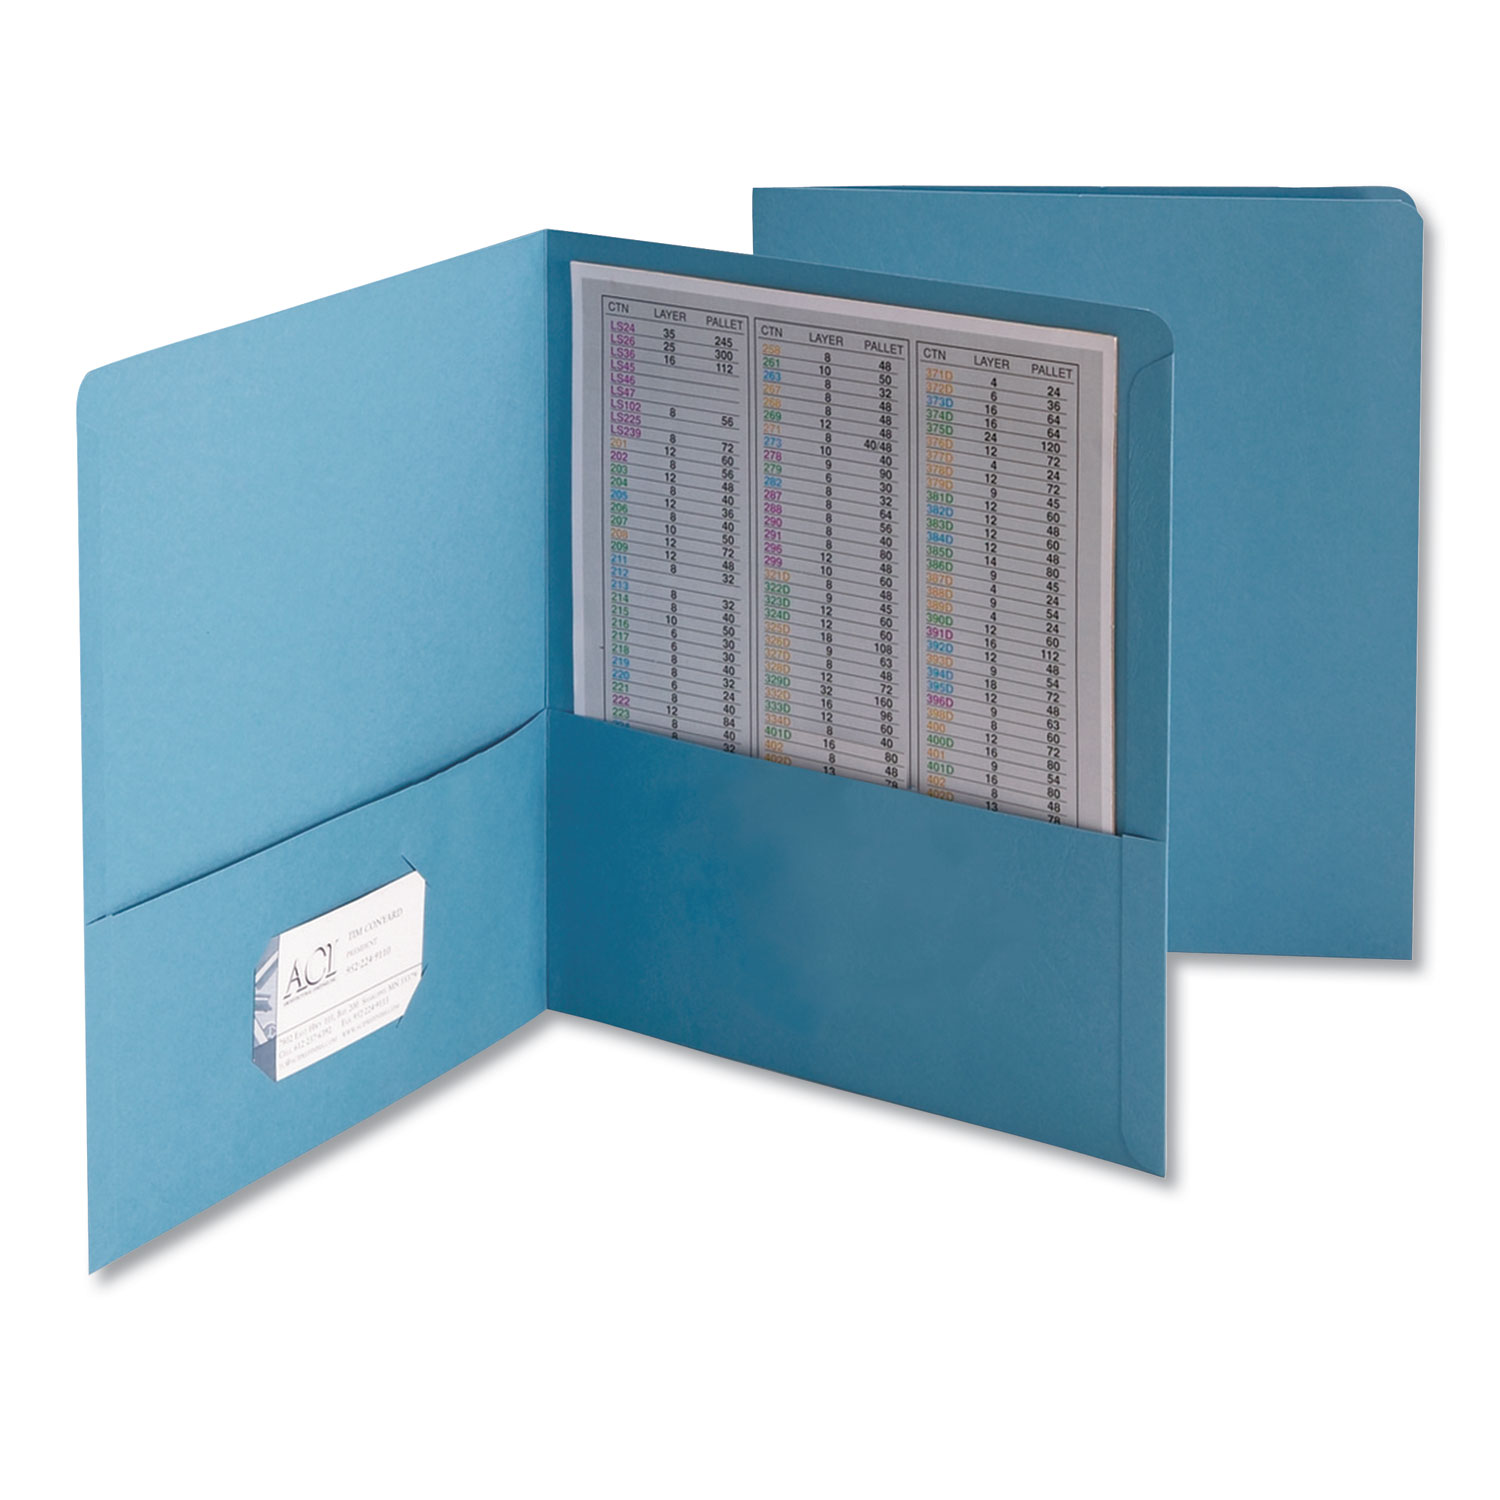  Smead 87852 Two-Pocket Folder, Embossed Leather Grain Paper, Blue, 25/Box (SMD87852) 